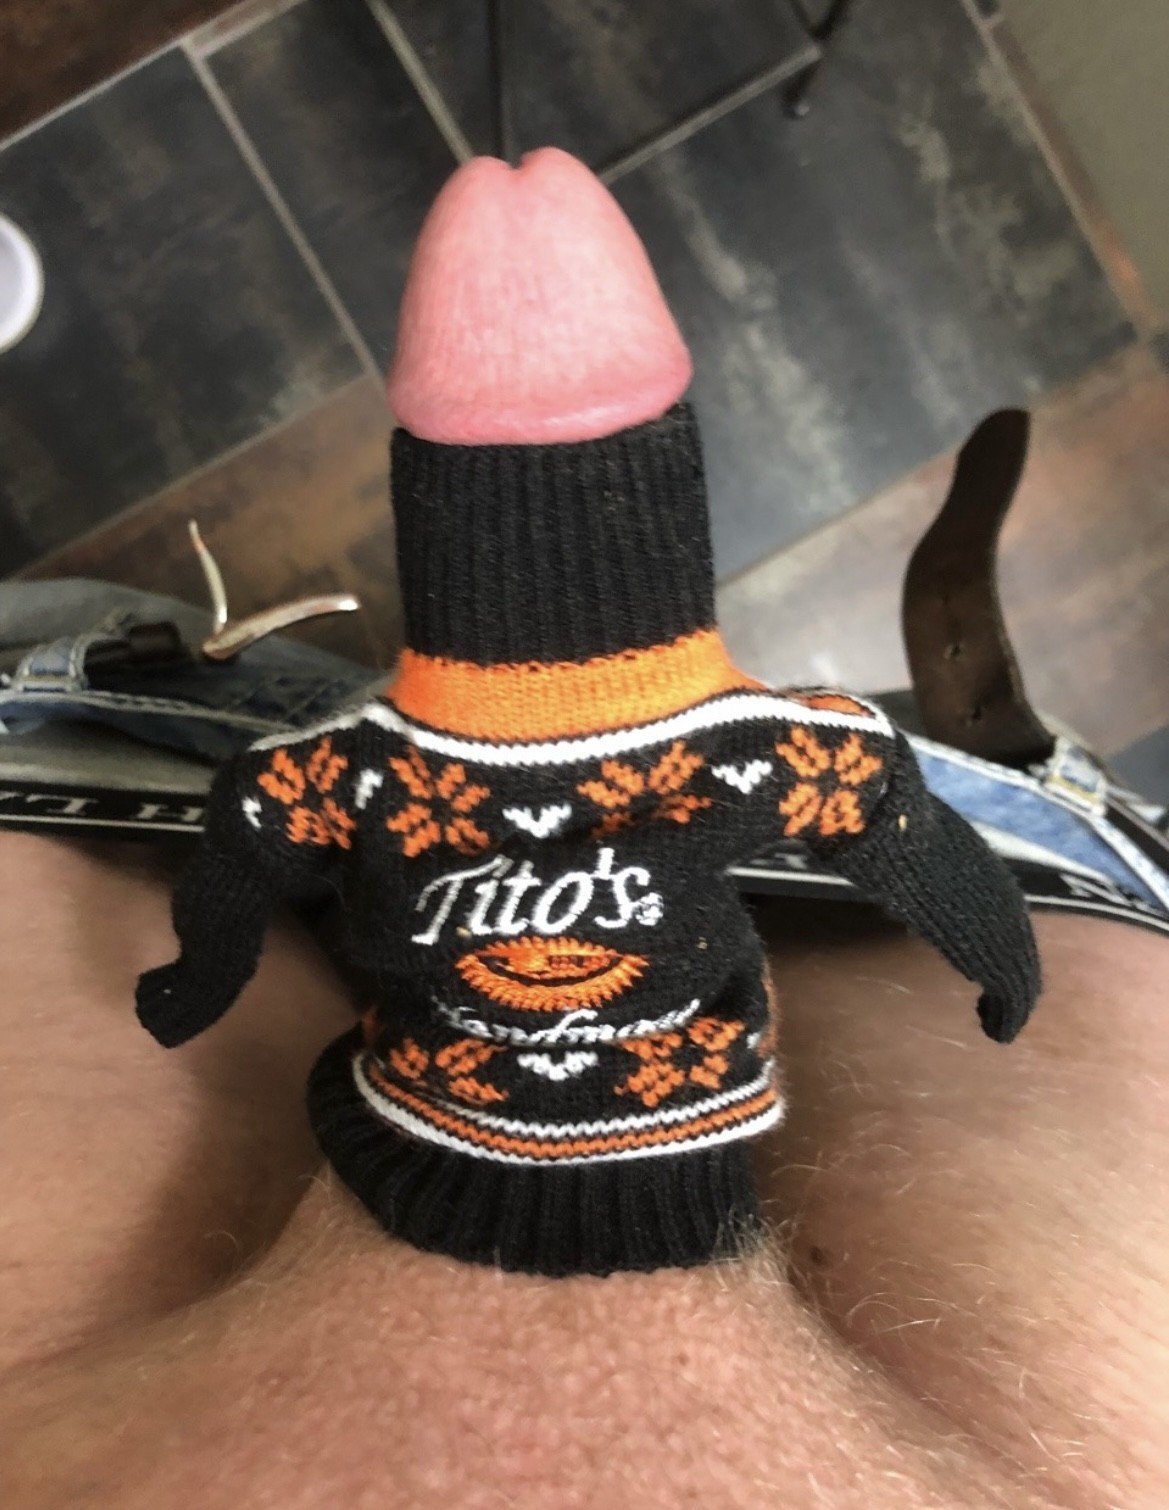 Photo by Sticksquirt31 with the username @Sticksquirt31, who is a verified user,  May 13, 2023 at 6:02 PM. The post is about the topic Funny costume nudes and the text says 'My Guys Winter Sweater.

PLEASE TELL ME WHAT YOU THINK!!!'